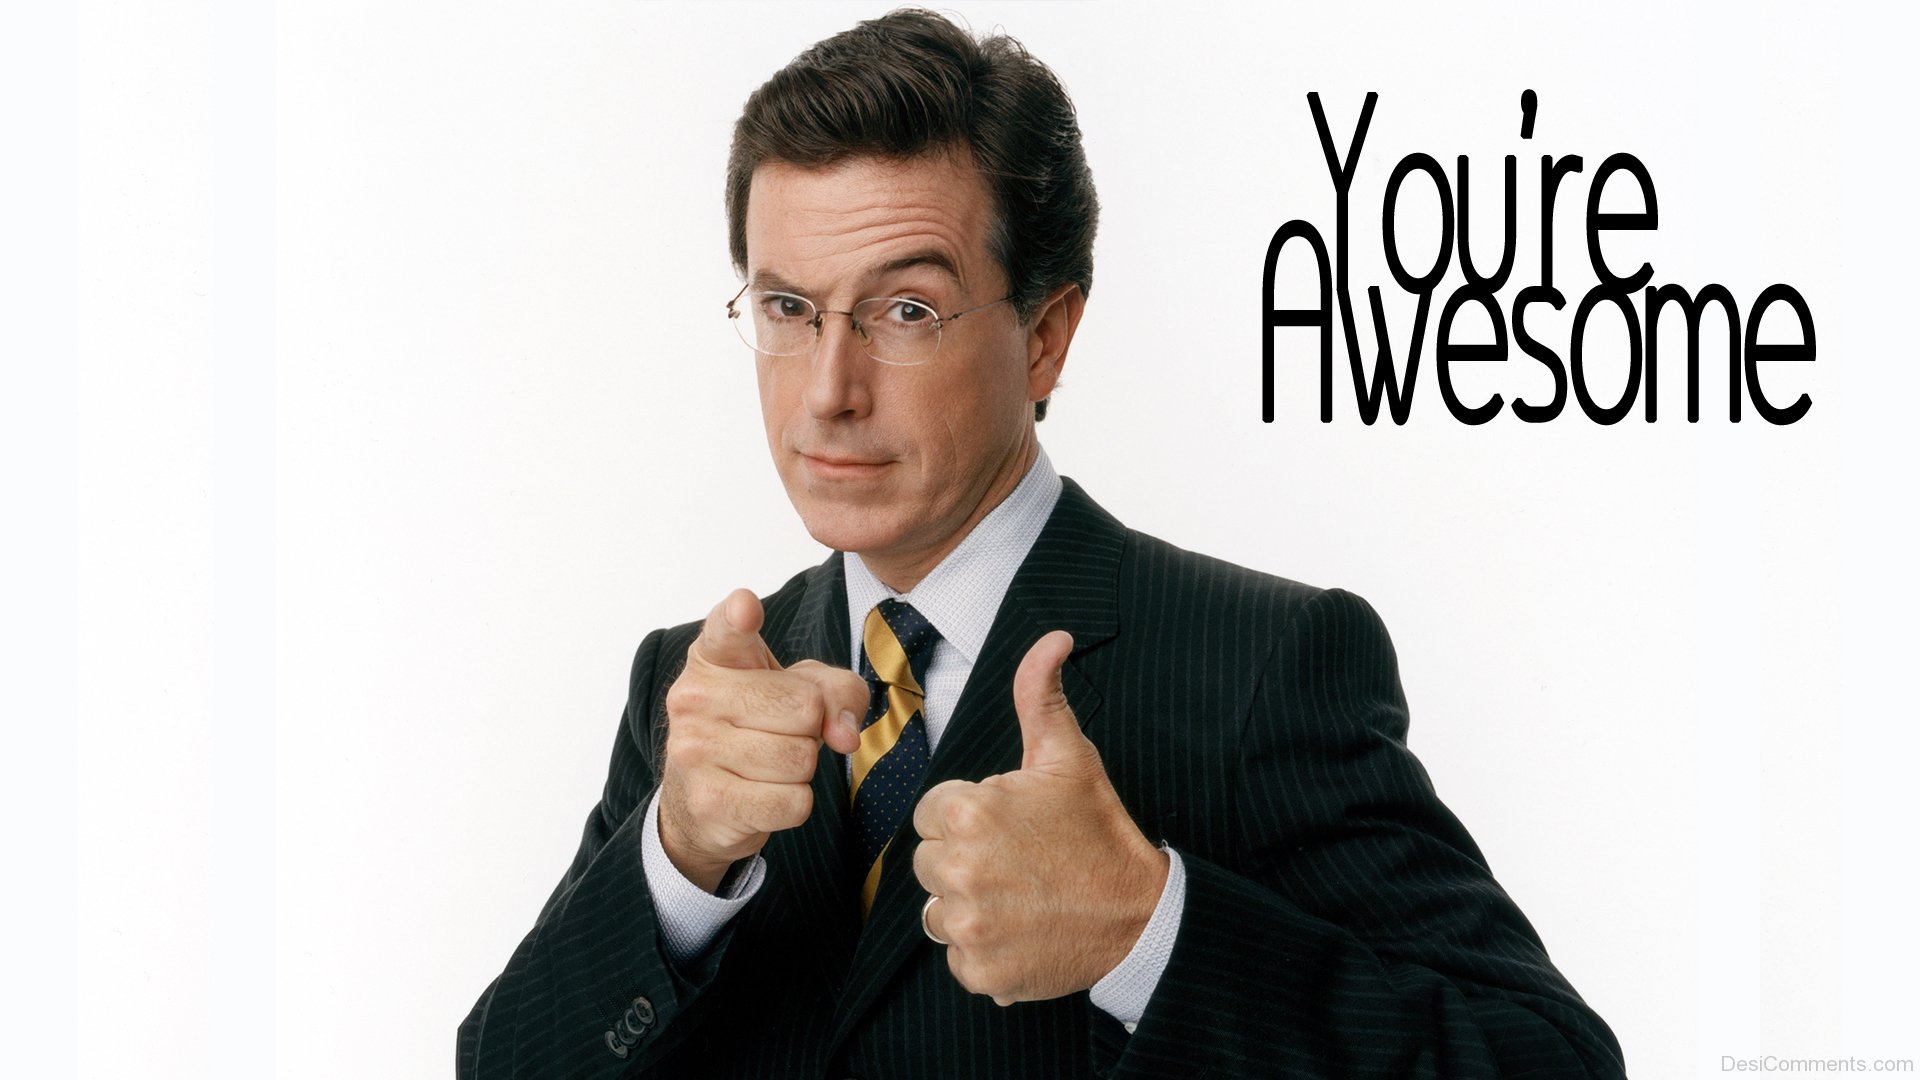 You’re Awesome Image - DesiComments.com